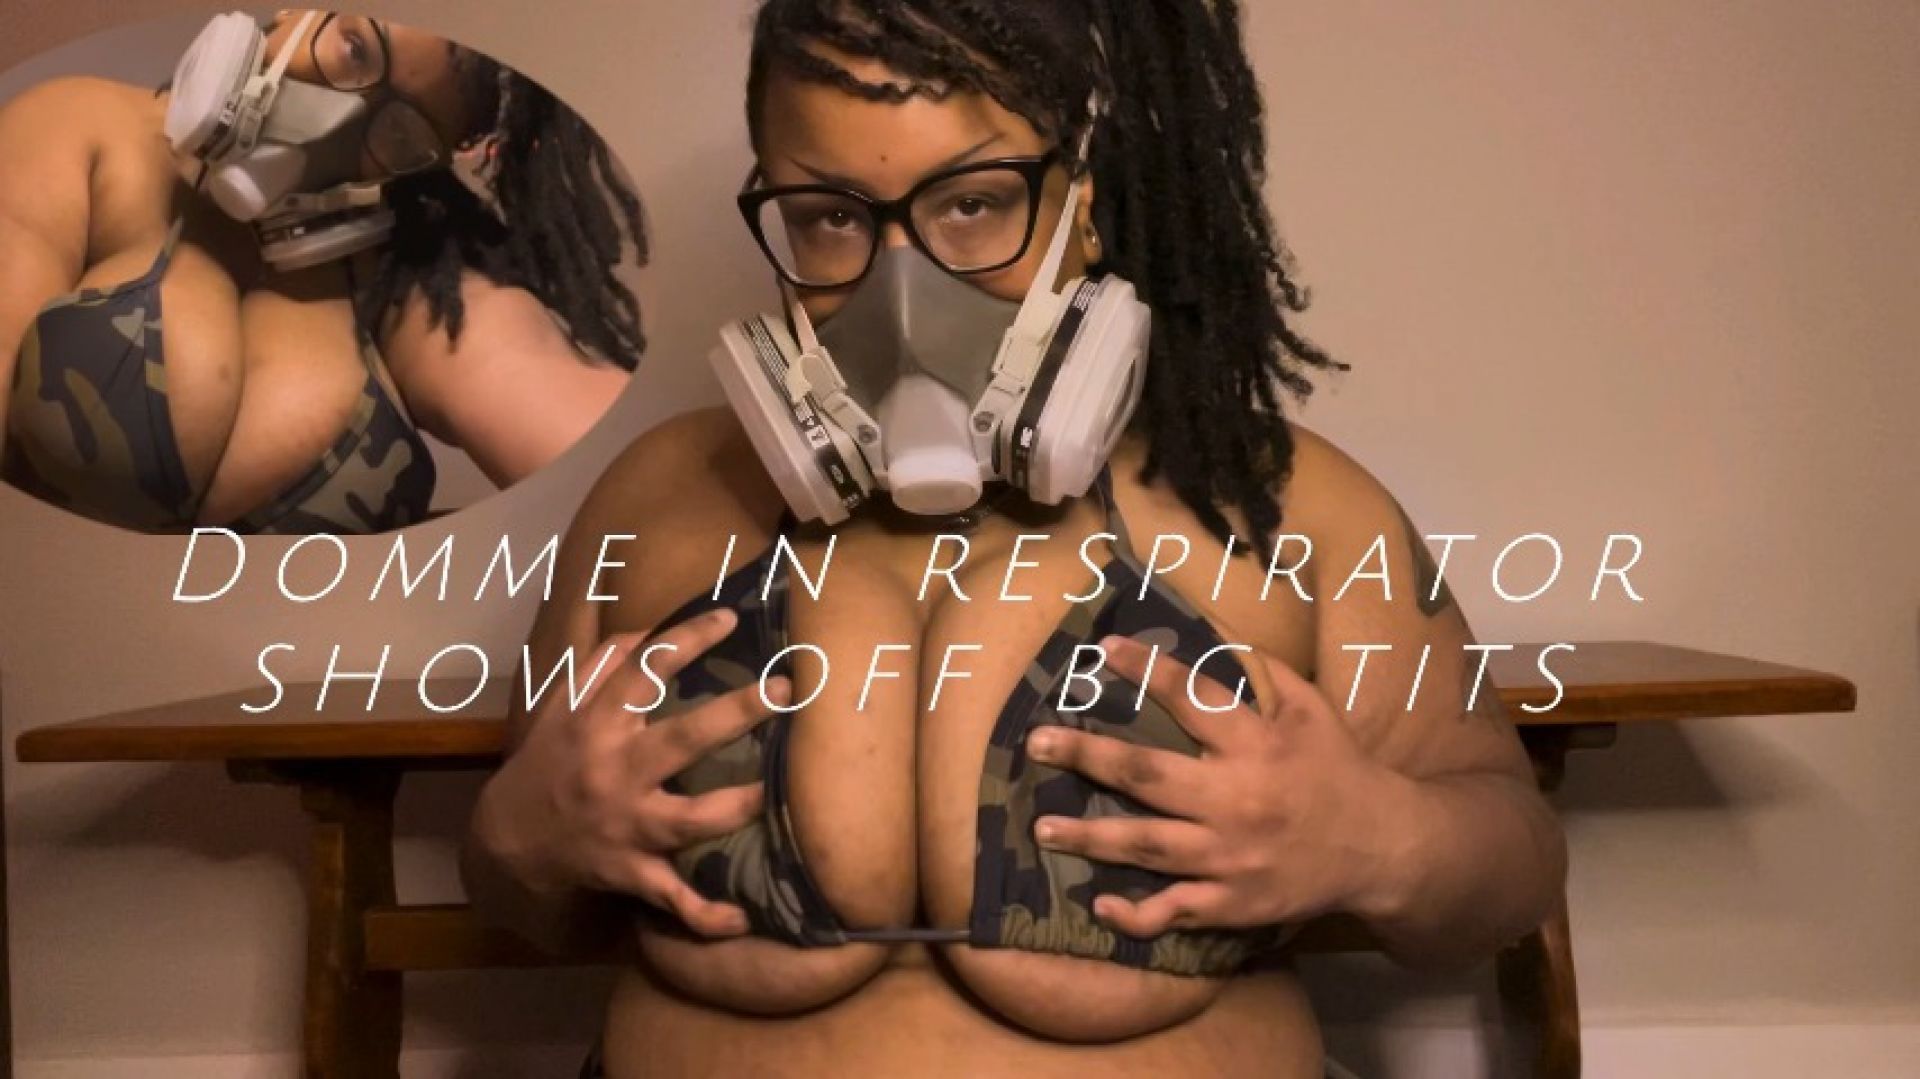 Domme in Respirator Shows off Big Tits